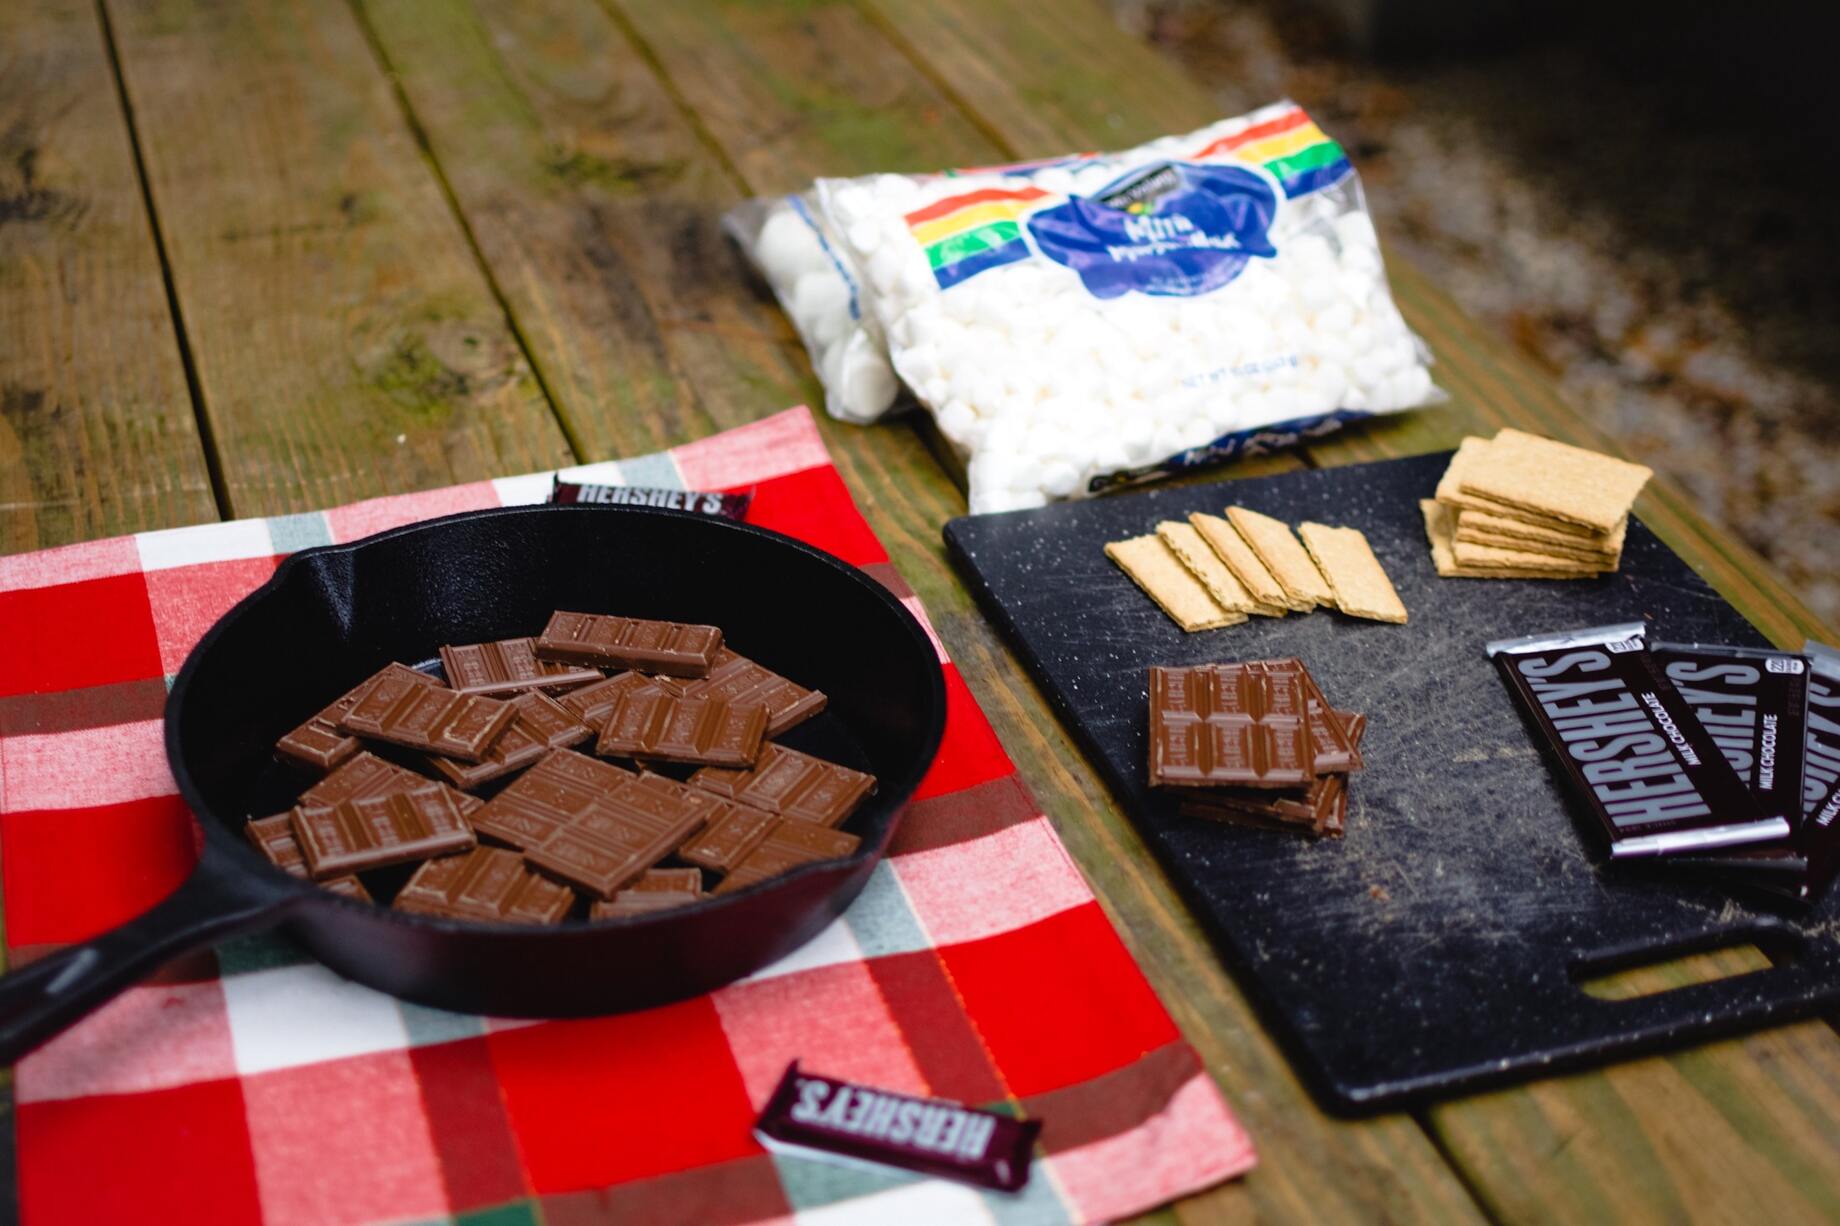 S’more ingredients on a picnic table